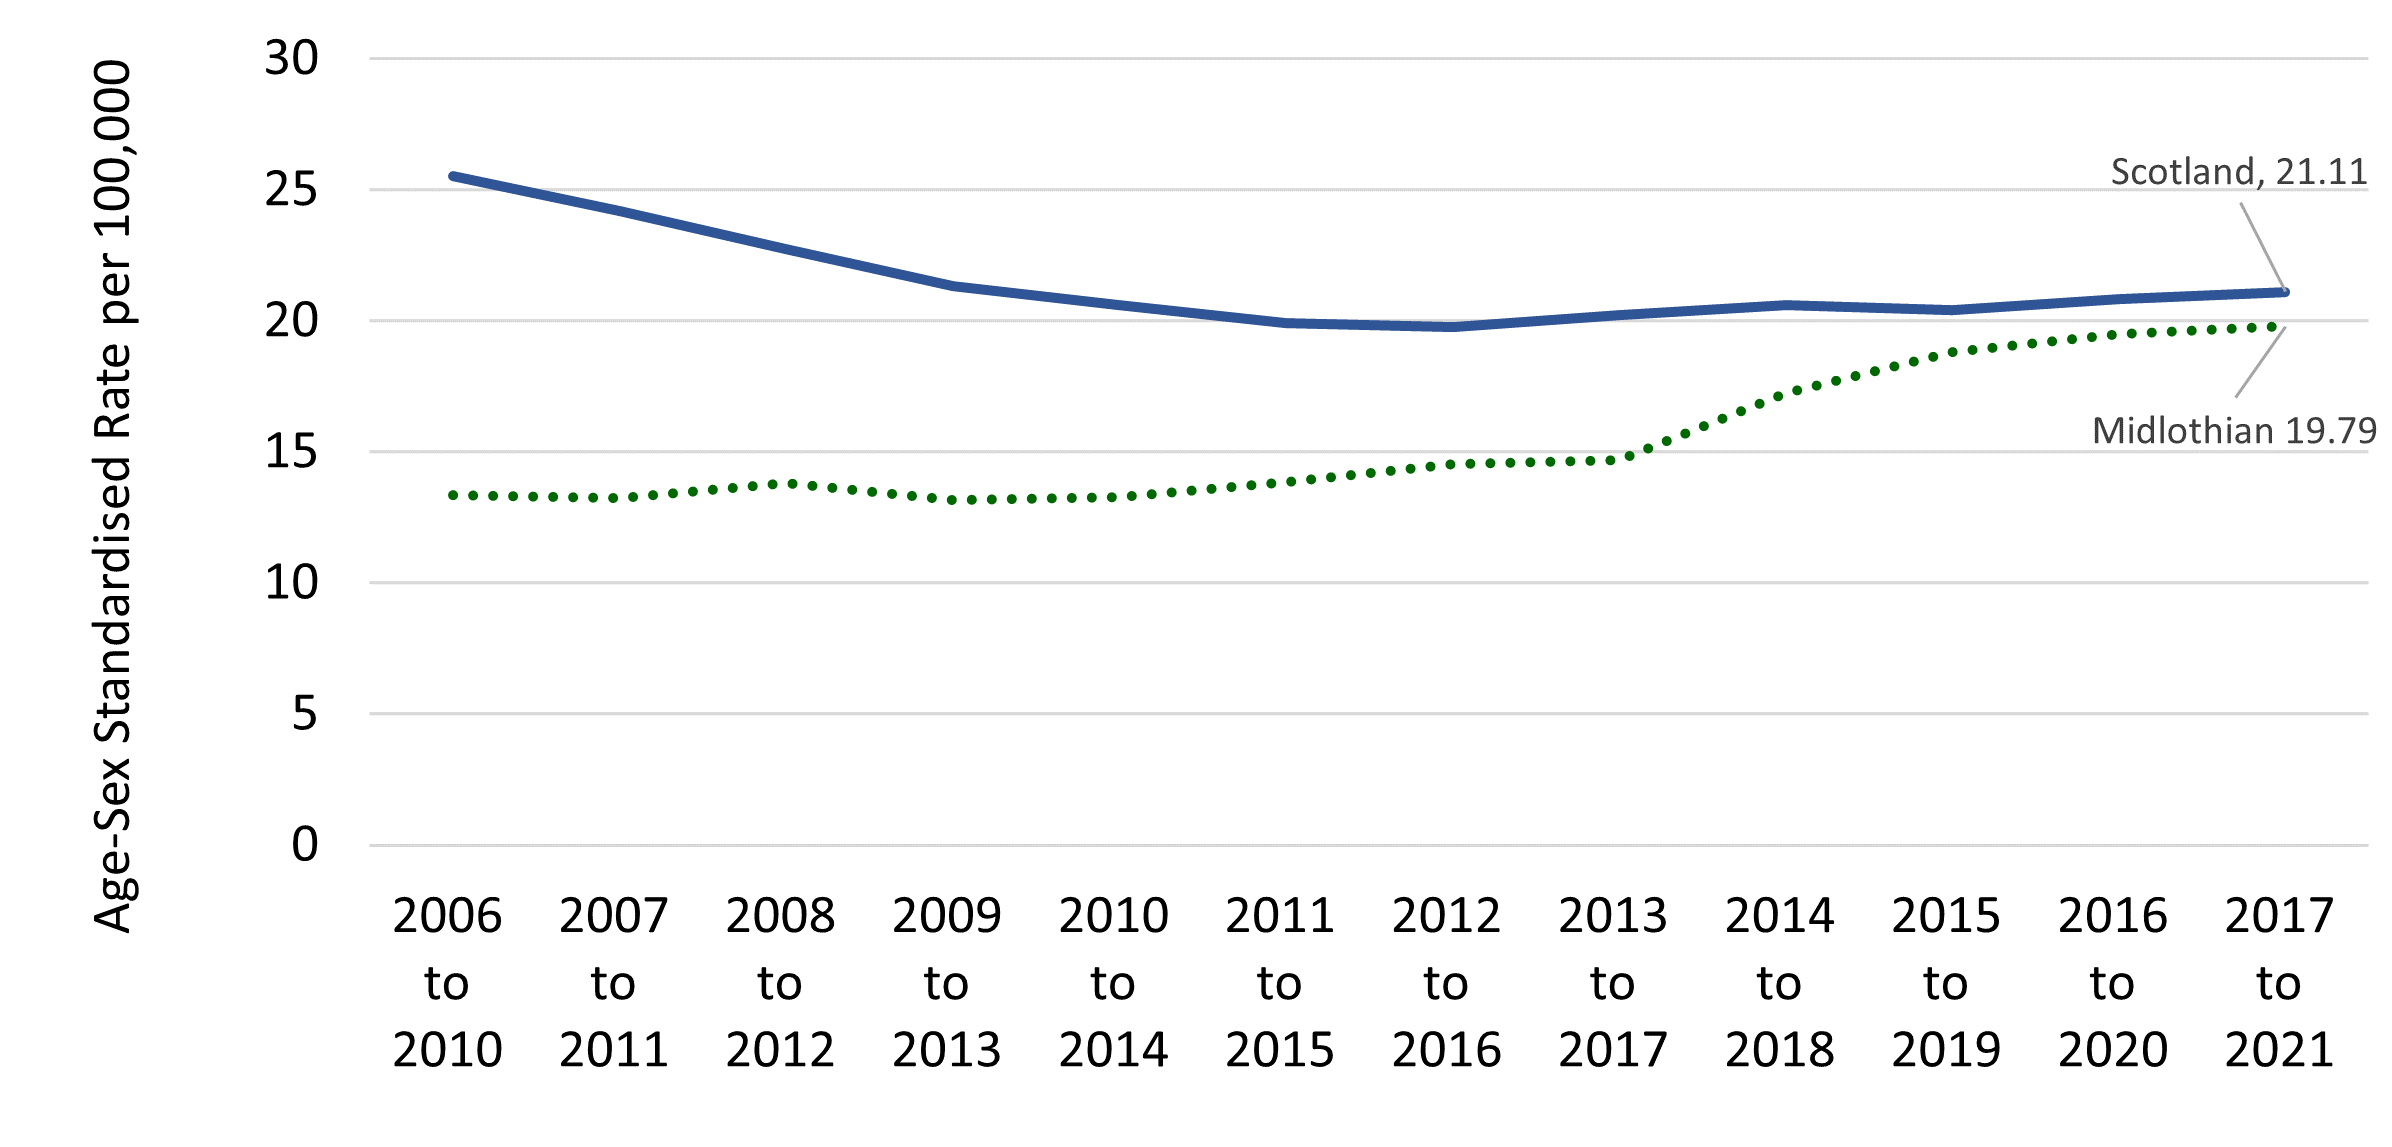 Deaths from alcohol conditions increased in Midlothian over the time period, with 13.4 deaths per 100,000 in 2006-10 rising to 19.8 per 100,000 by 2017-2021.  In contrast, Scotland has seen alcohol related deaths drop from 25.5 to 21.1 per 100,000 over the same period. In Midlothian, the largest increase was from 2013-2017 to 2014-2018 where the rate increased from 14.7 to 17.3. Midlothian rates have consistently been lower than national rates but are approaching them in recent years.